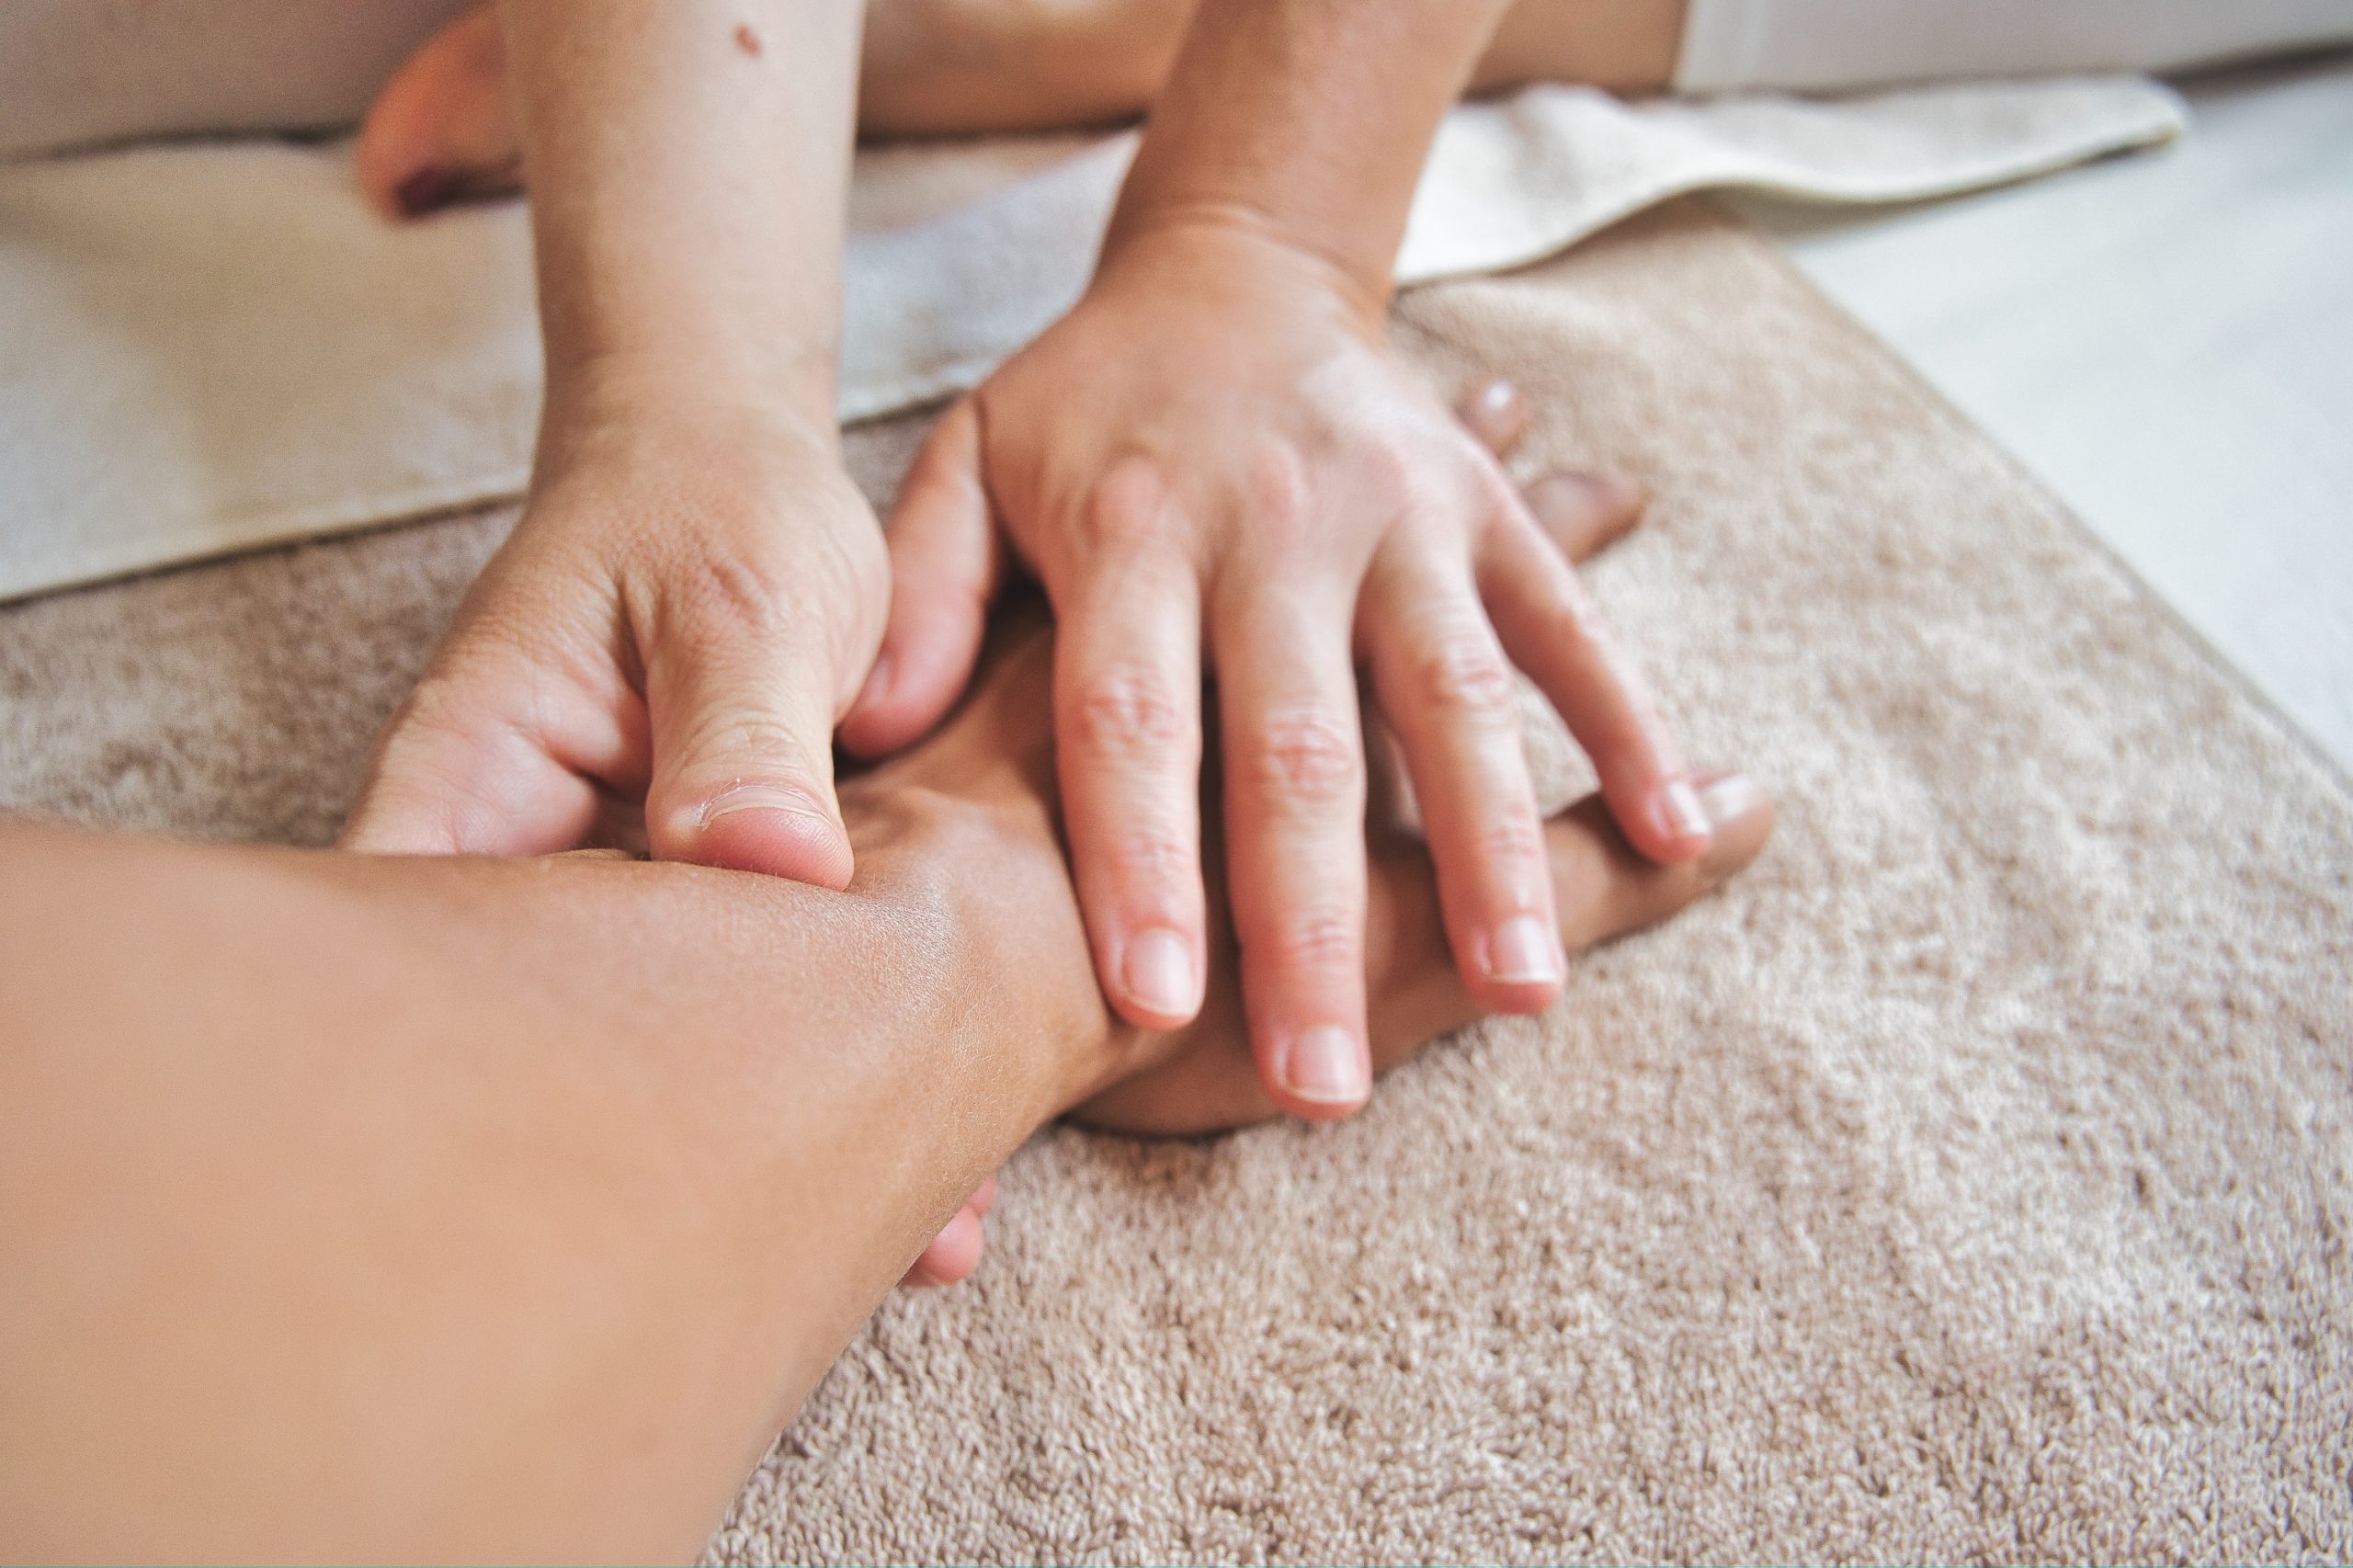 Therapeutic massage at Maintain Yourself PDX Massage